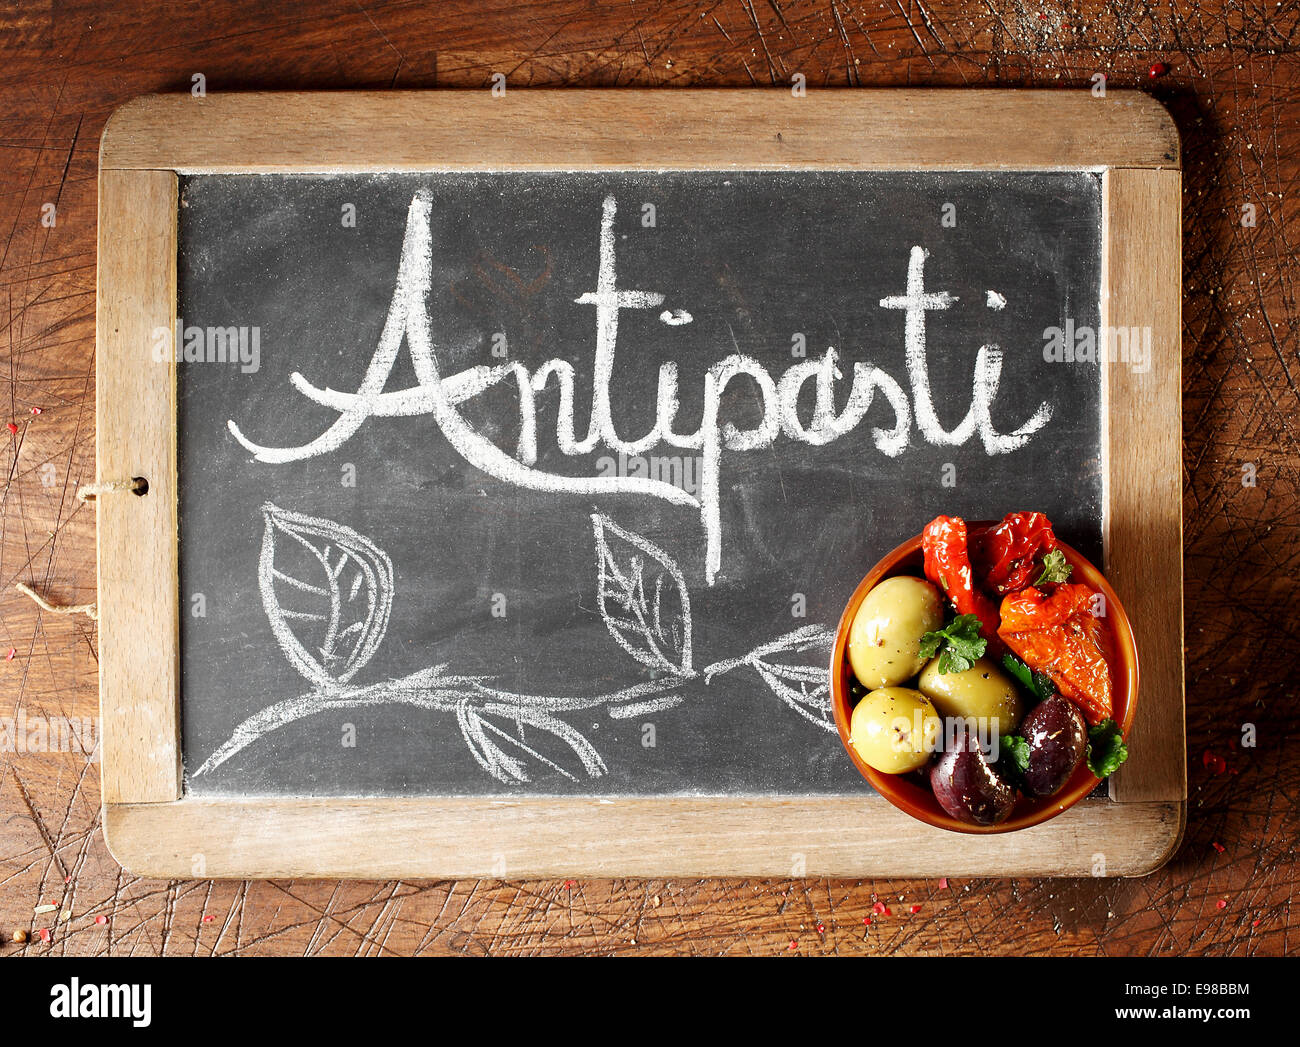 Chalkboard Antipasti sign with handwritten text and decorative foliage with a small bowl of black and green olives and hot chilli peppers in the corner, overhead view on a wooden background Stock Photo